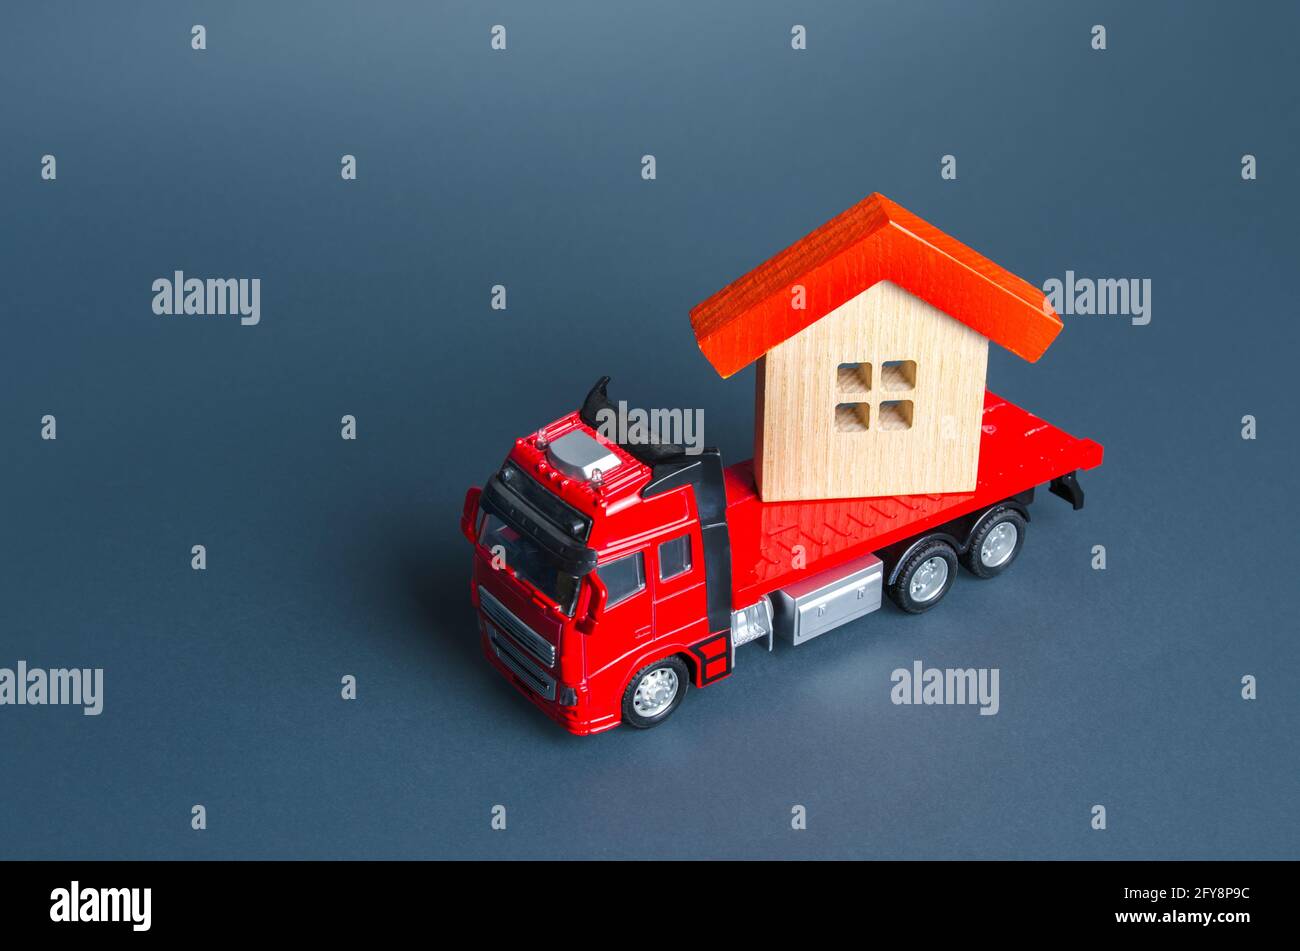 Truck transporting a house. Delivery services to another house. A moving company. Transportation of real estate. Resettlement program for new housing. Stock Photo